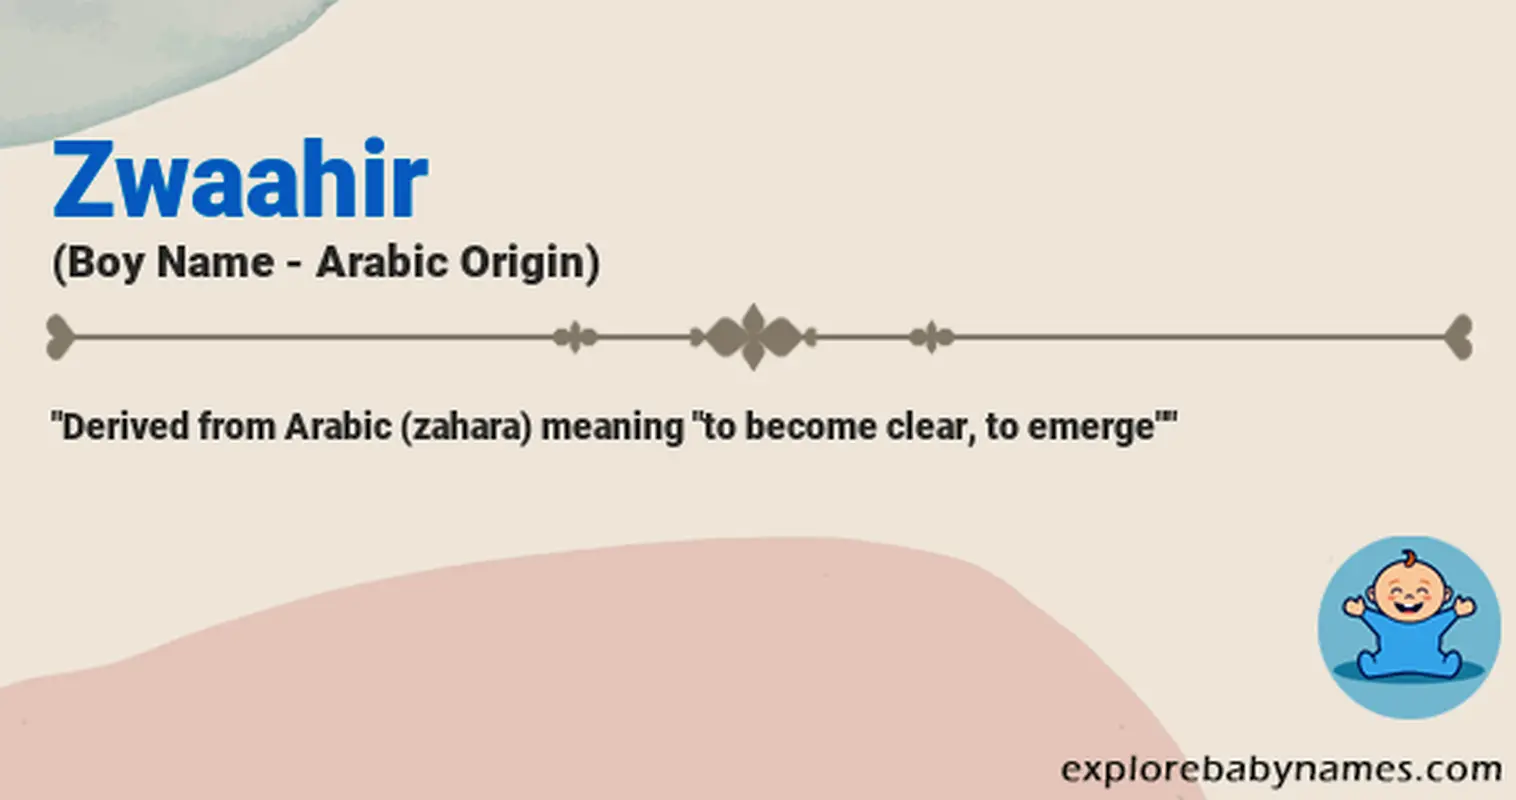 Meaning of Zwaahir